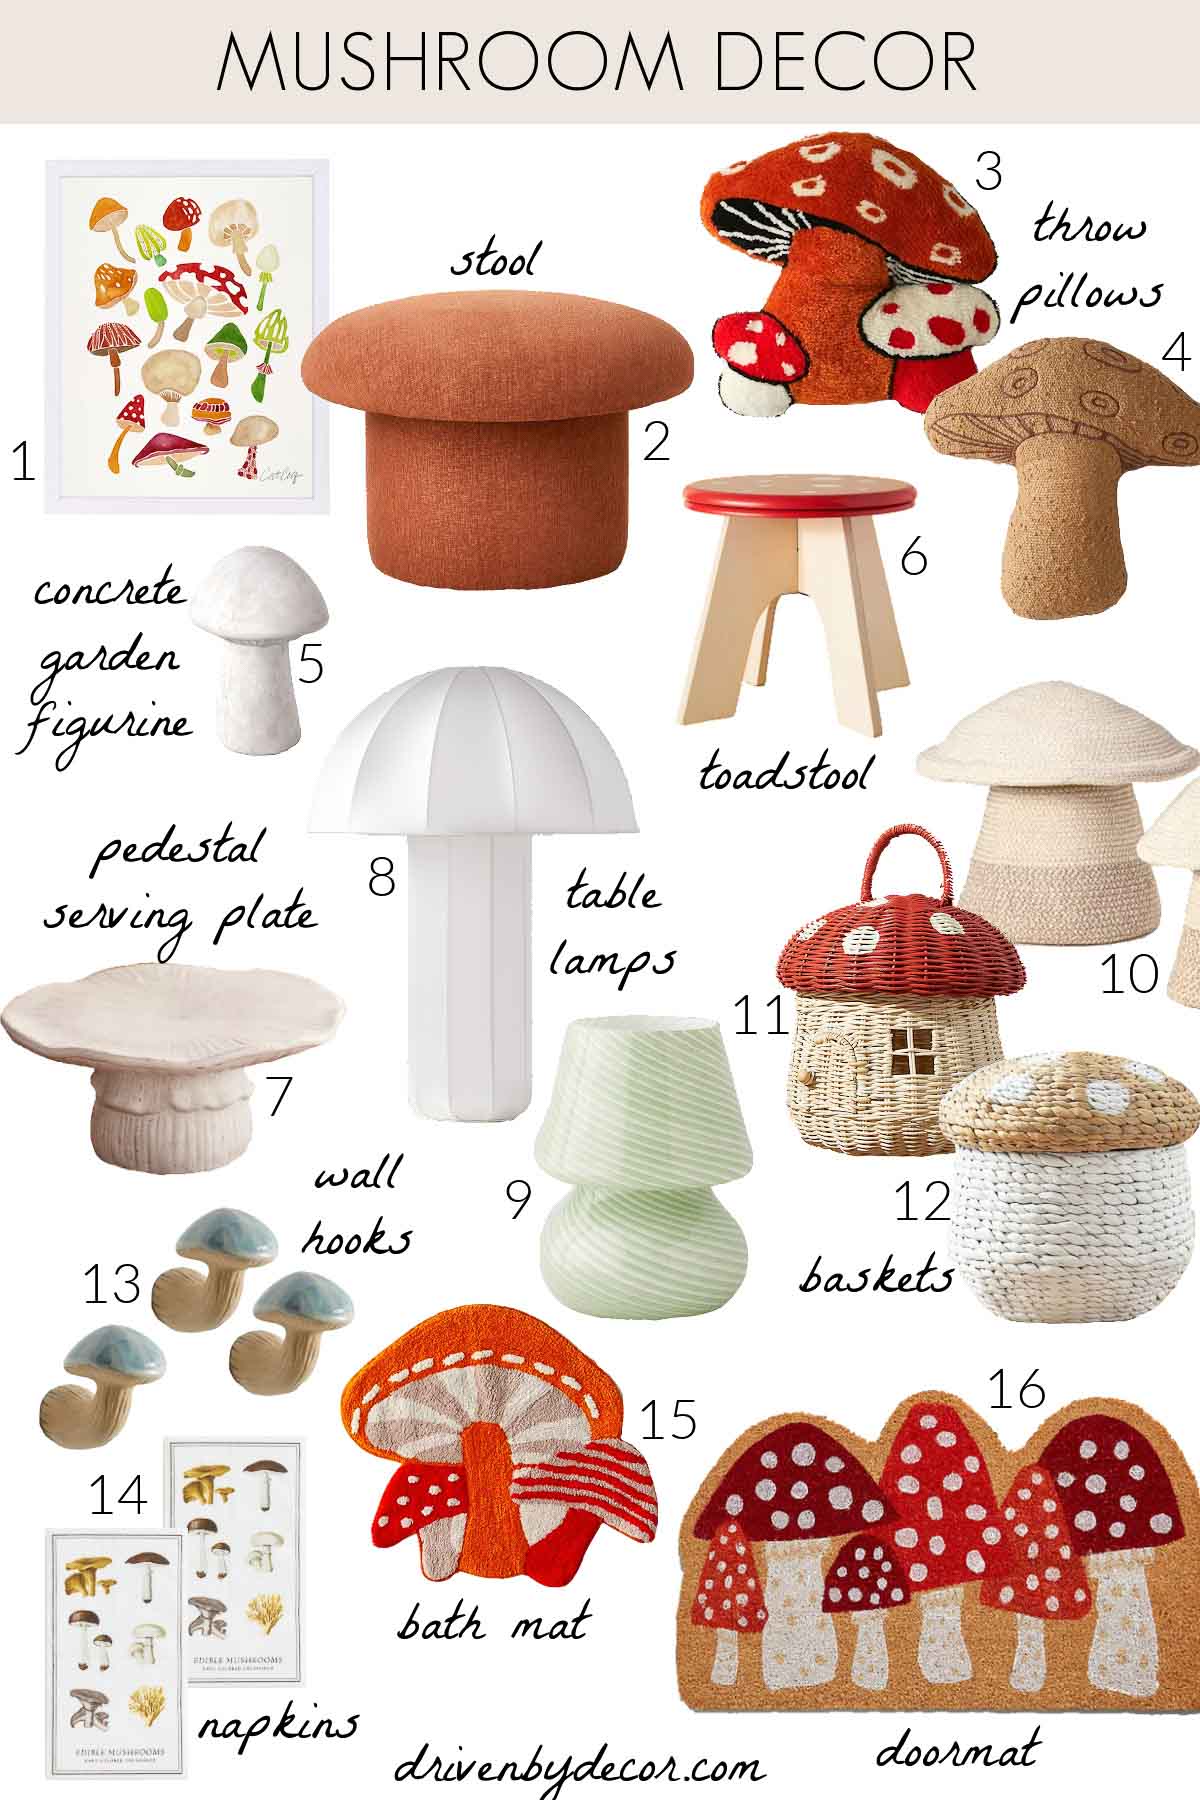 Mushroom decor products as a 2023 trend